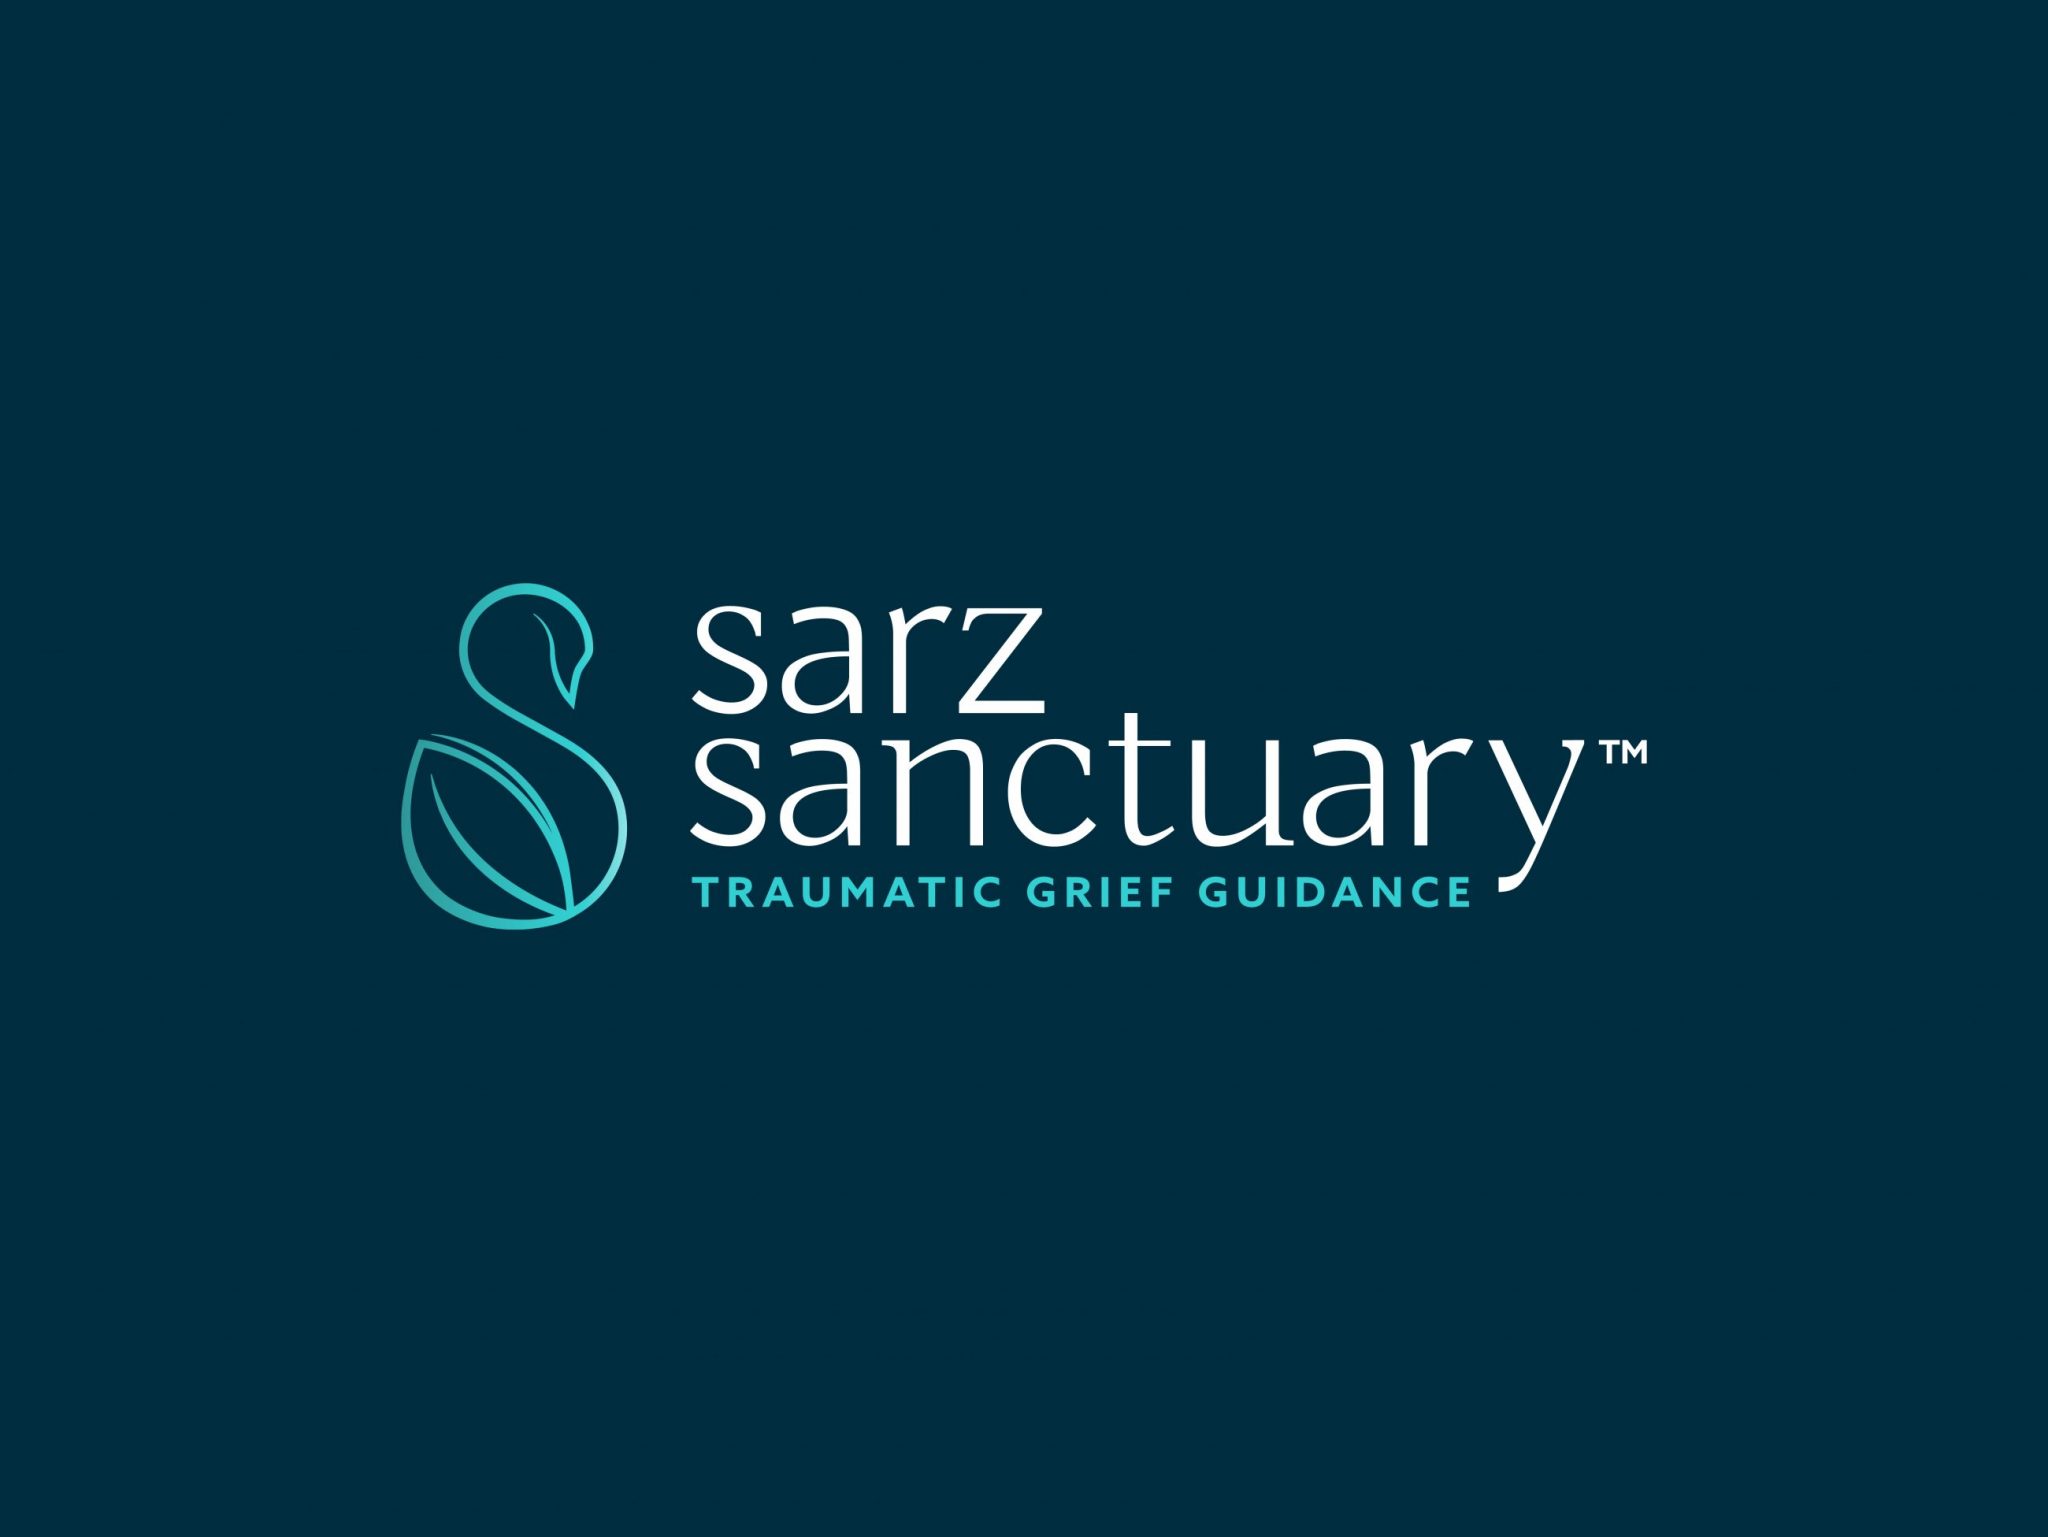 Brand identity design for not-for-profit brand Sarz Sanctuary, providing traumatic grief guidance